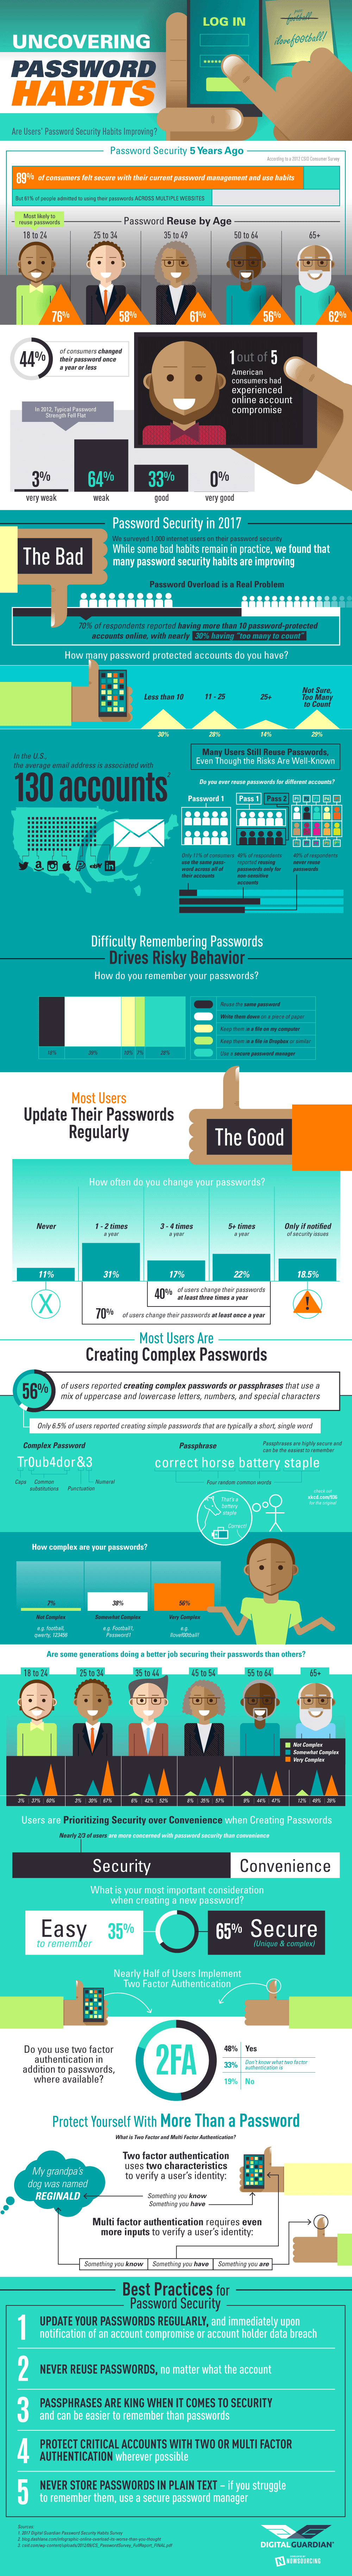 examples of good passphrases 2019